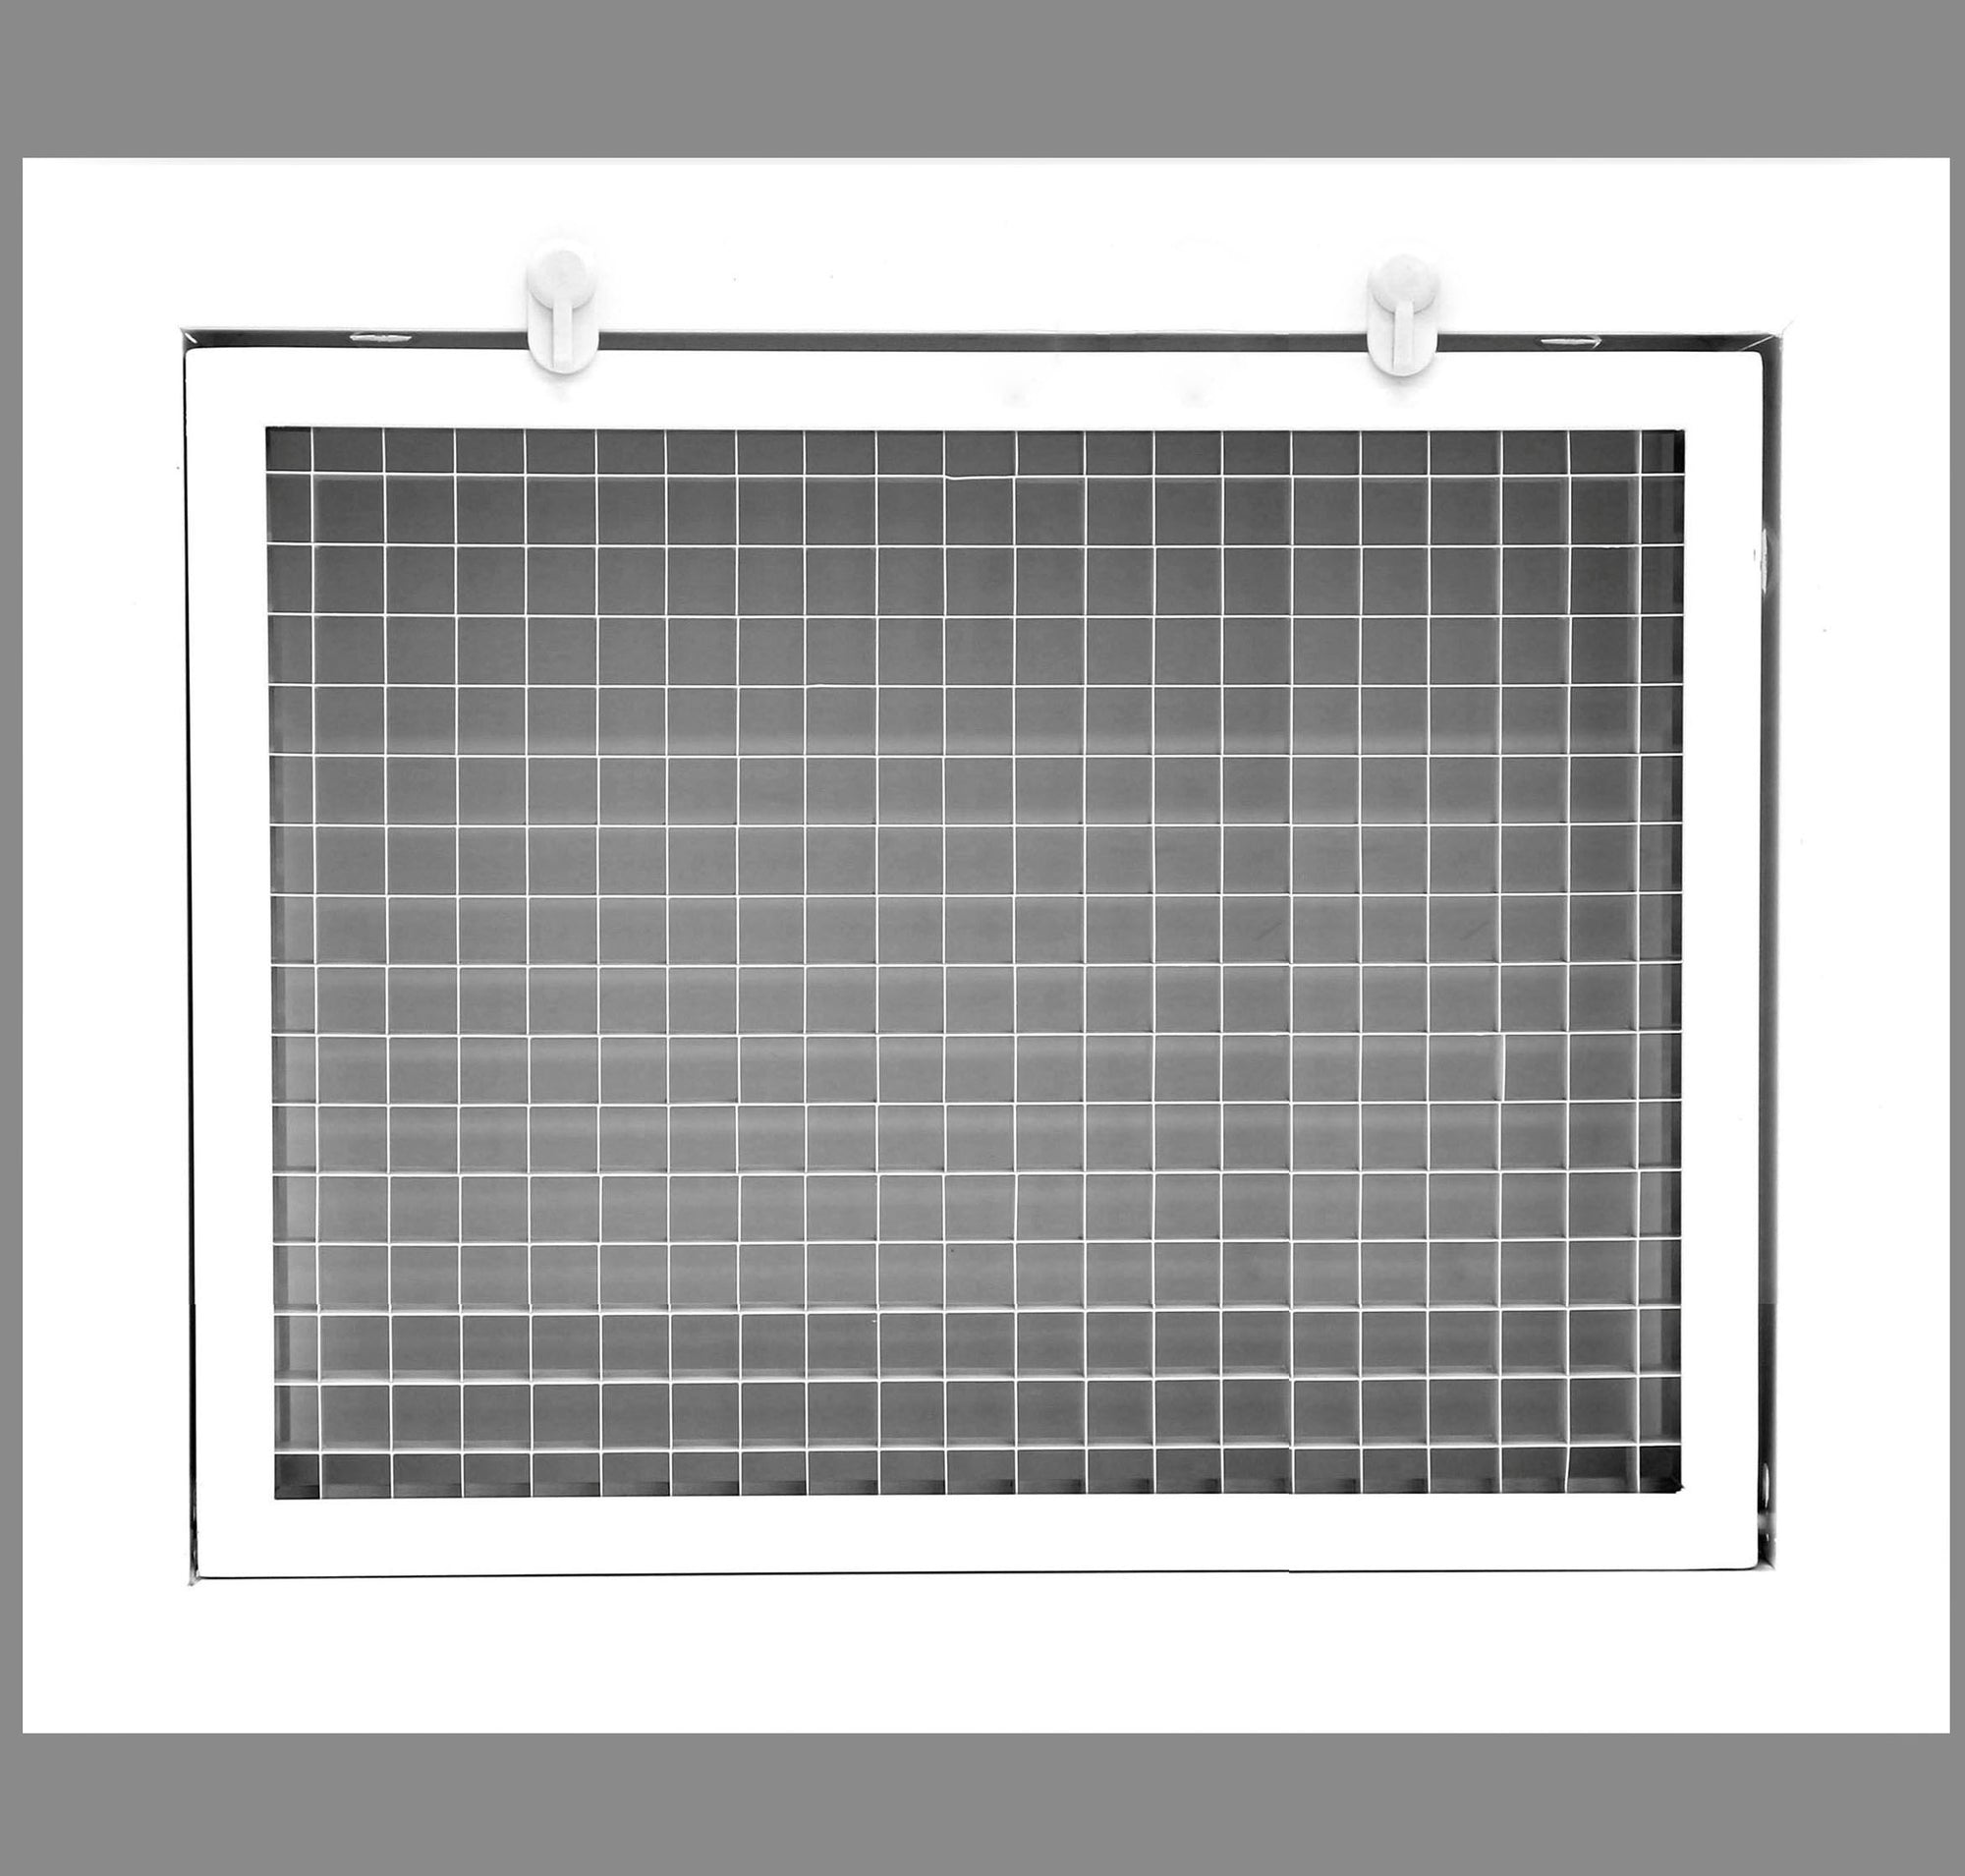 12" x 8" Cube Core Eggcrate Return Air Filter Grille for 1" Filter